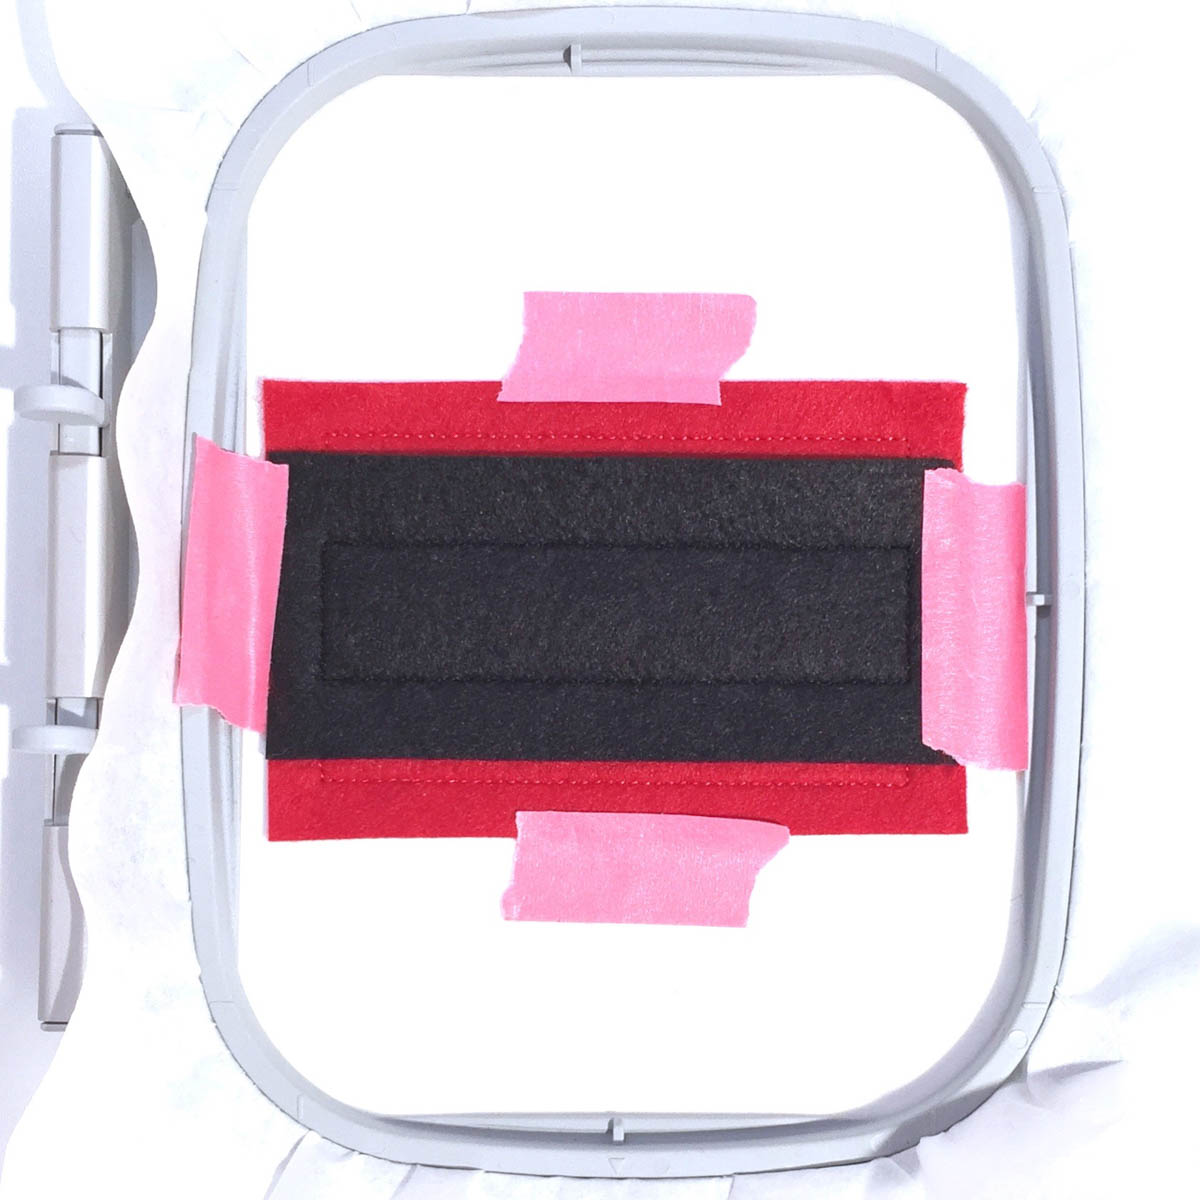 Santa Pants Gift Card Holder Tutorial - Place the black felt over the center placement lines